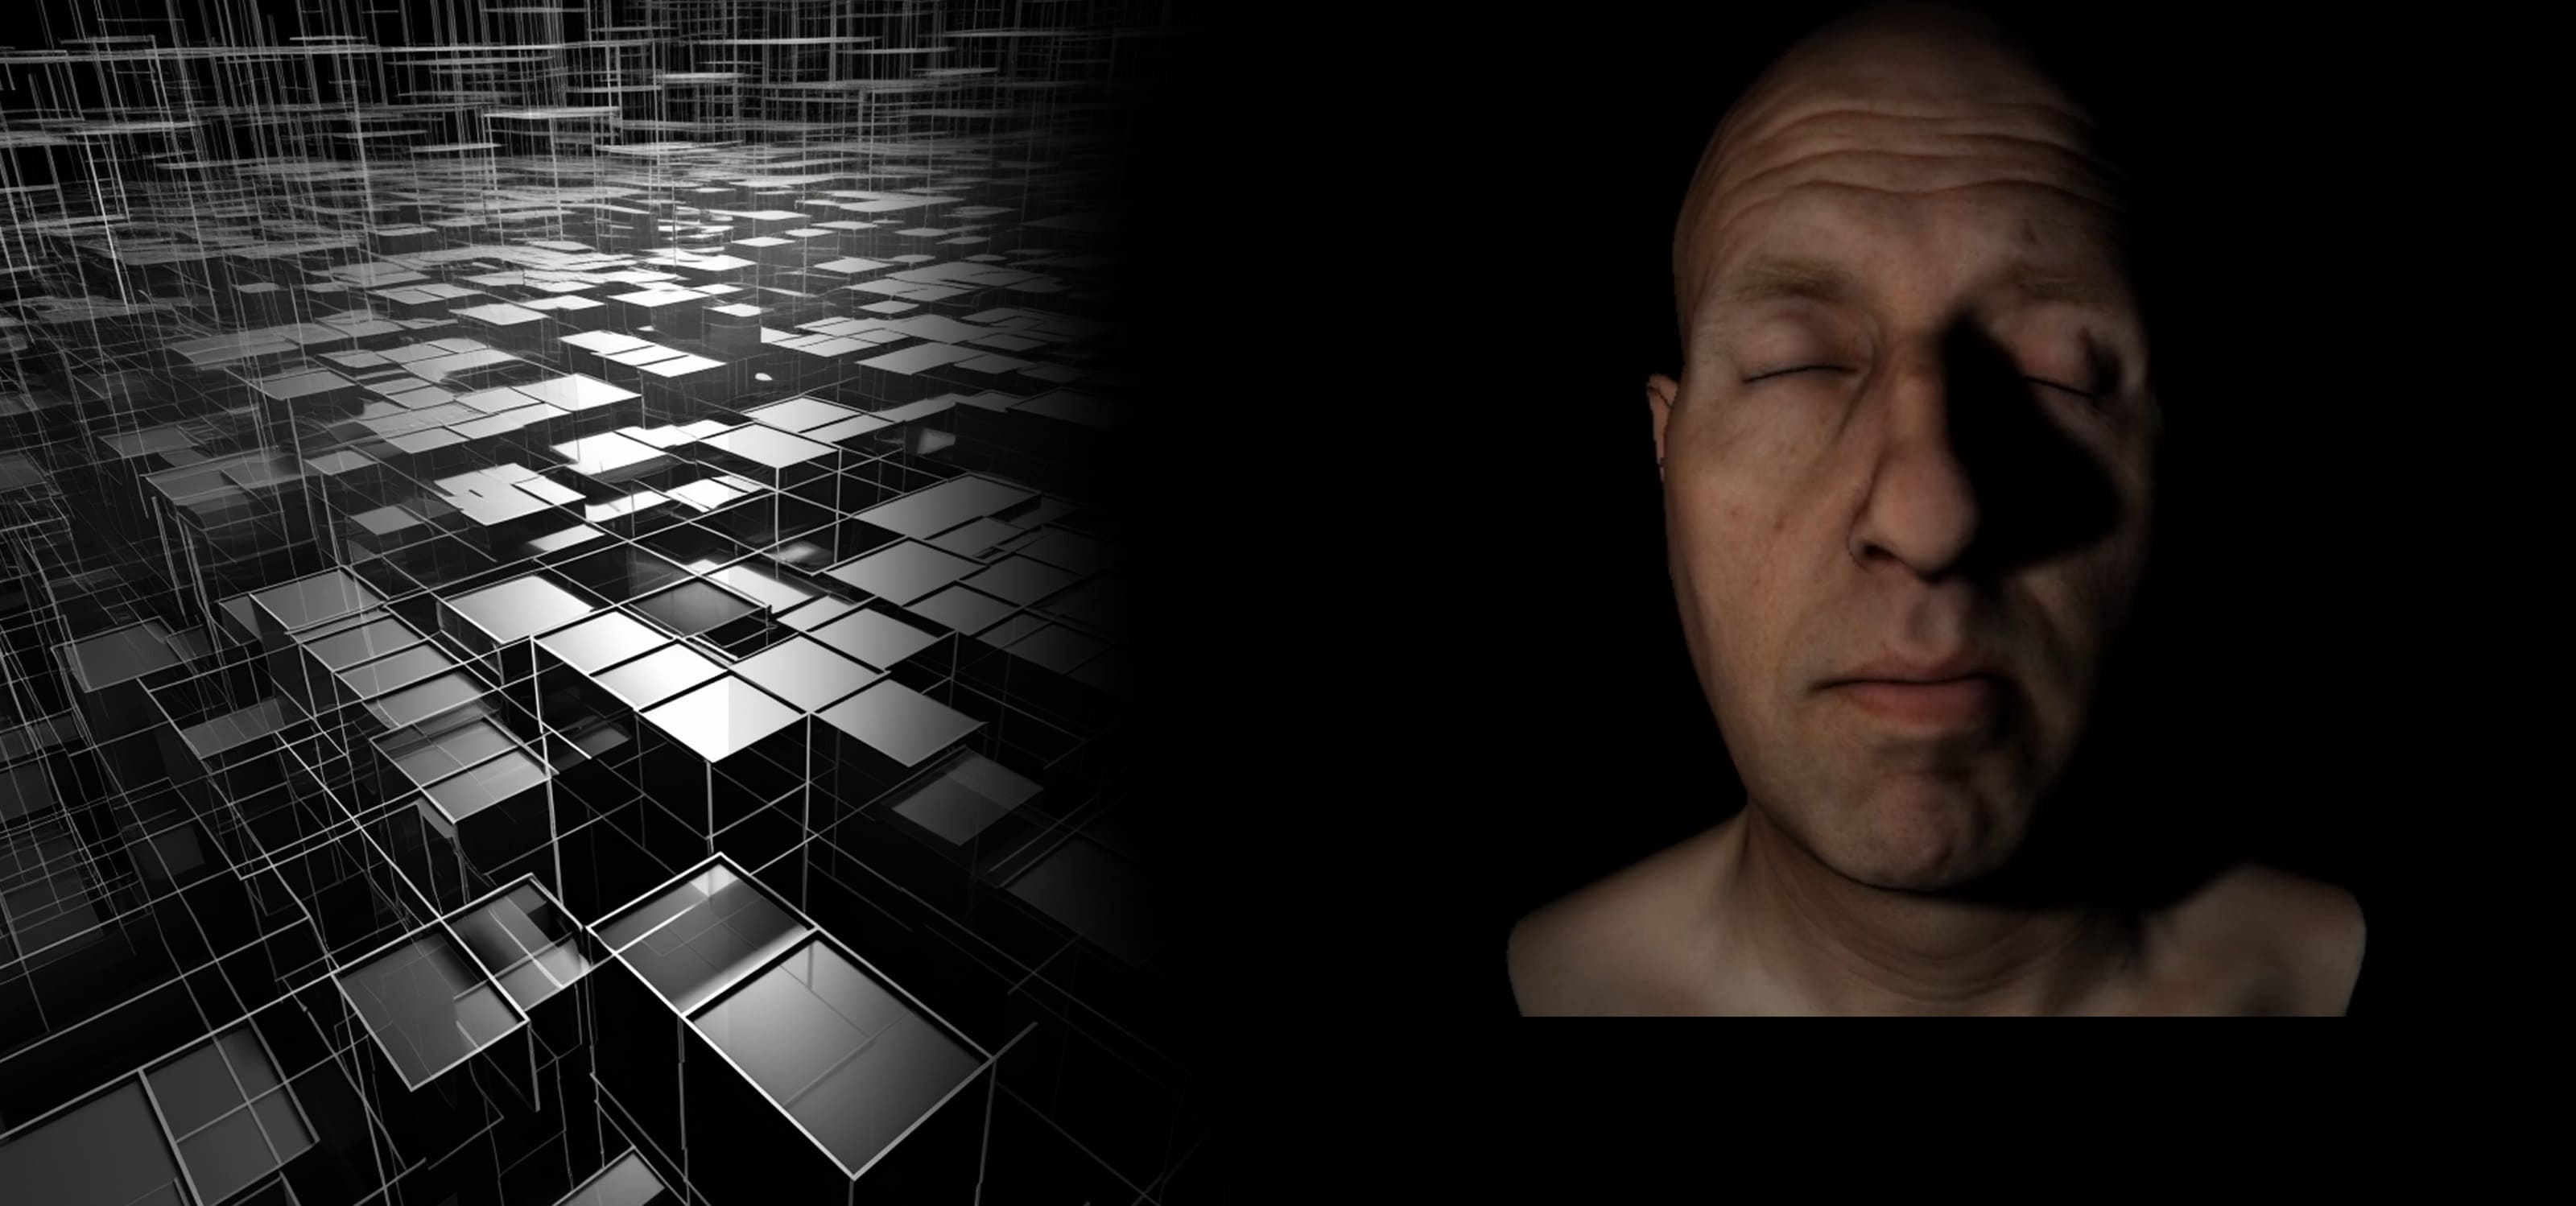 Results of an image from the Advanced Certificate Program in Rendering and Simulation, featuring a cube pattern on one side and a humanoid bust on the other side.